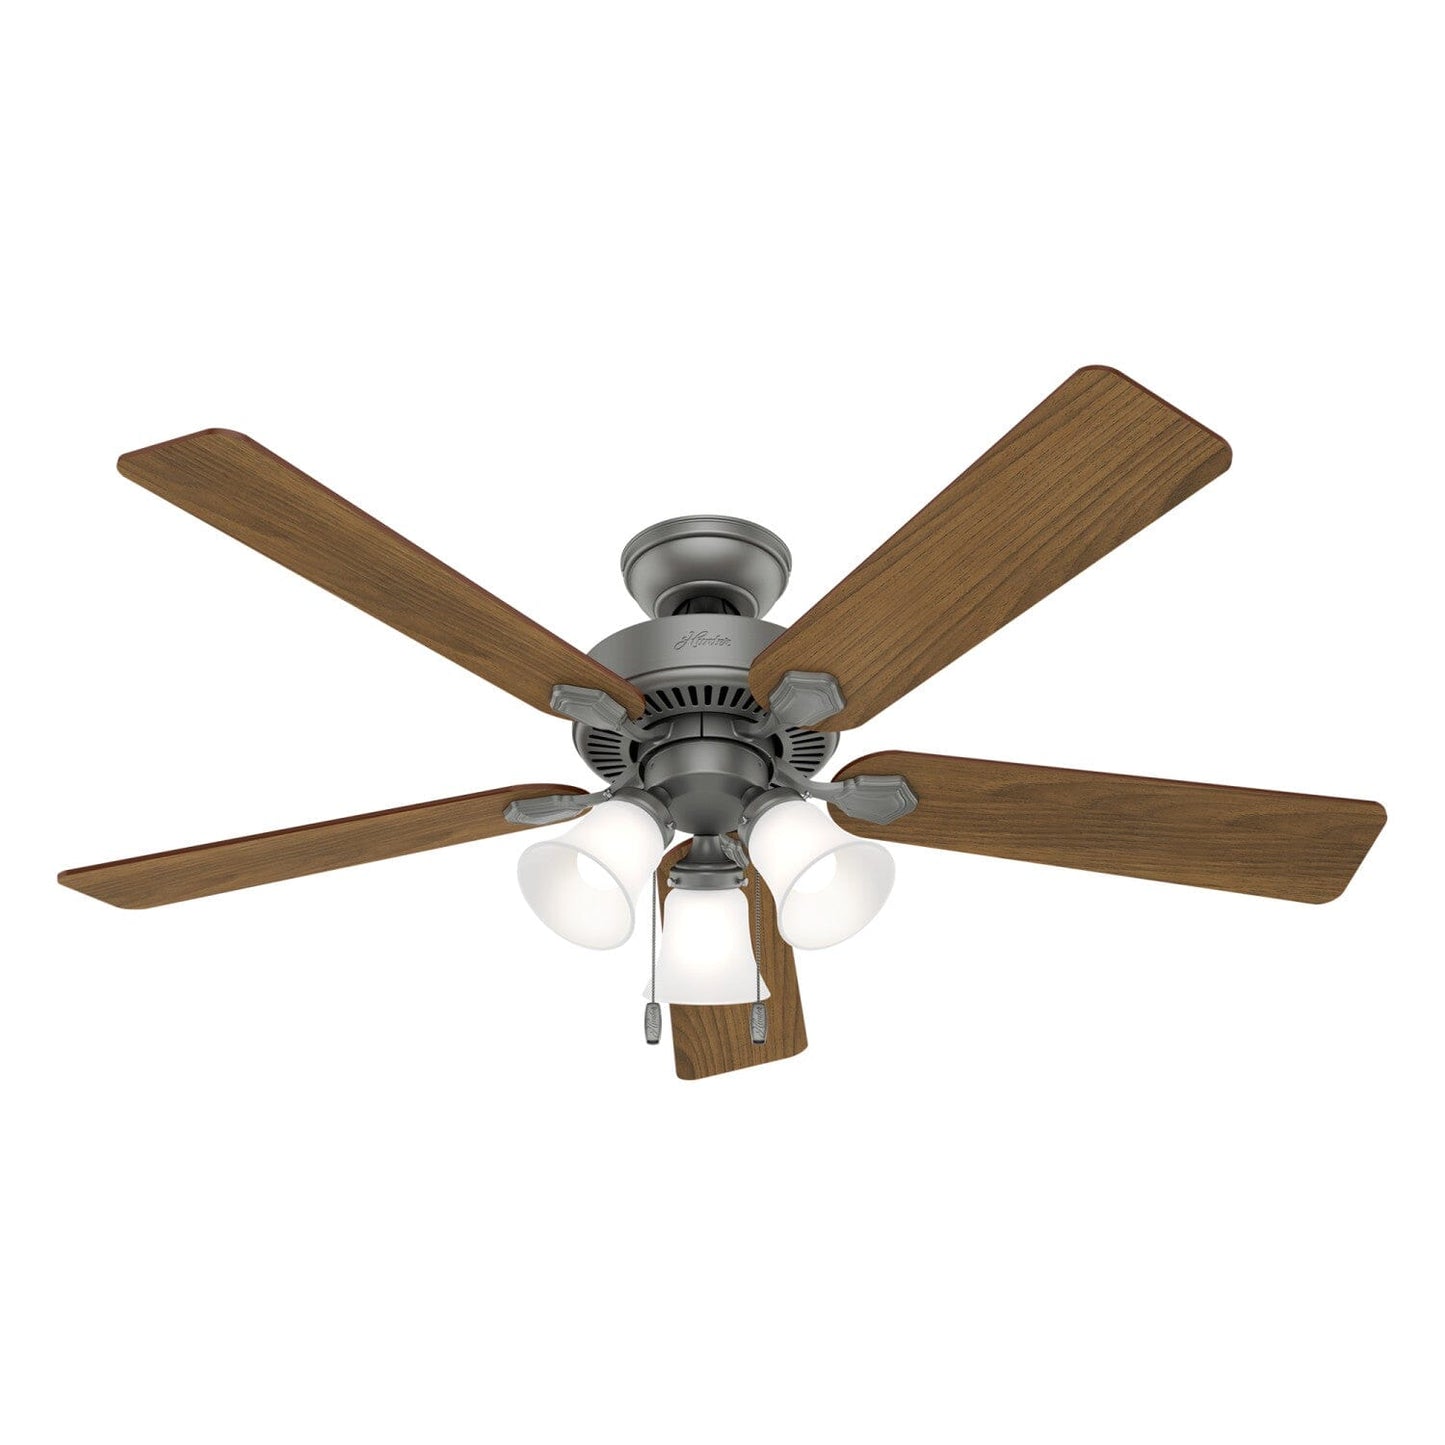 Swanson with LED Light 52 inch Ceiling Fans Hunter Matte Silver - Autumn Walnut 